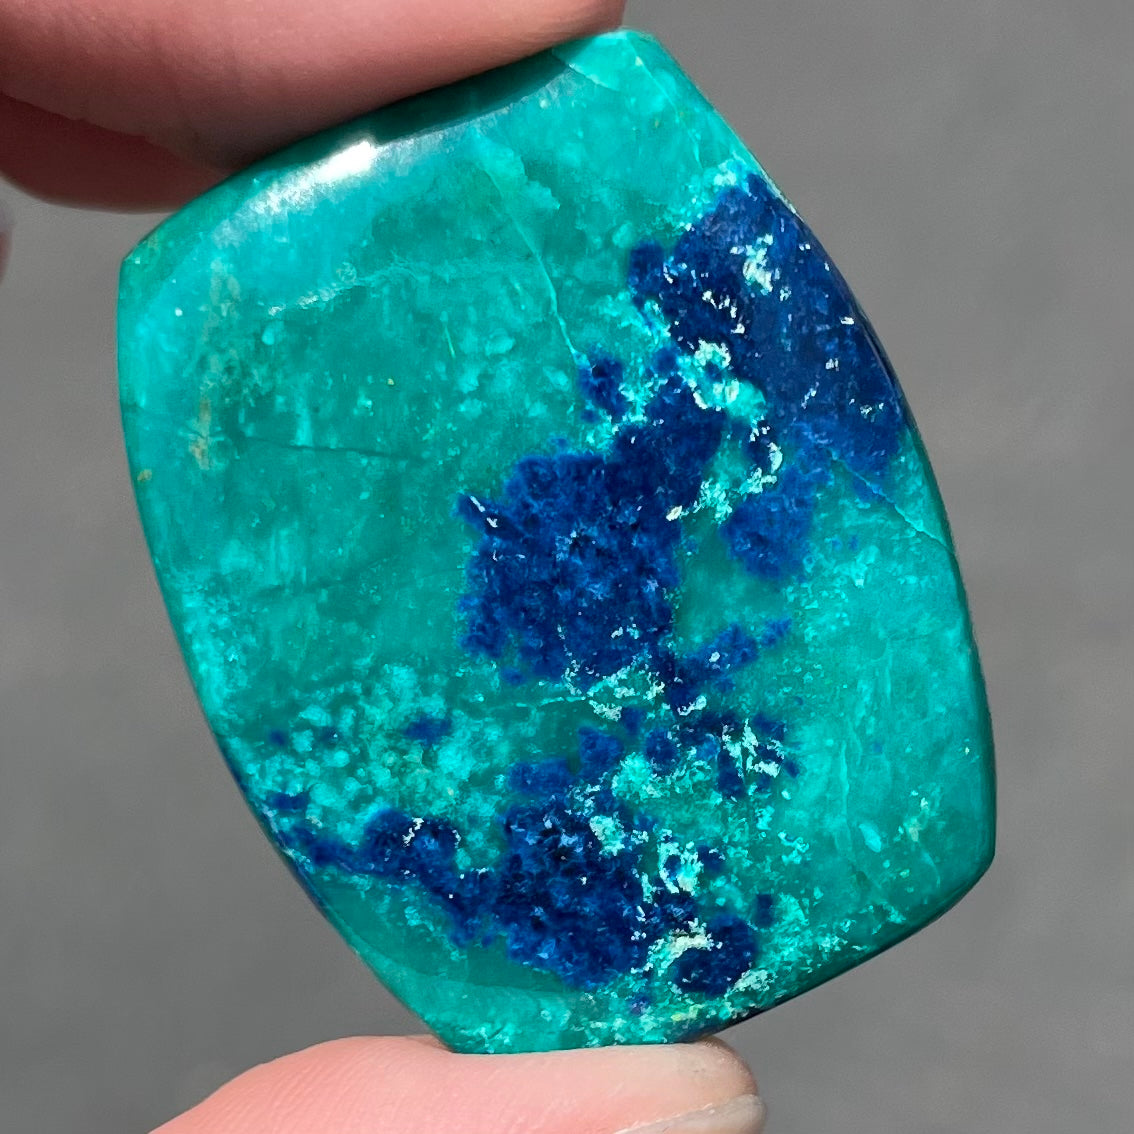 A polished, cushion shaped chrysocolla stone with azurite inclusions.